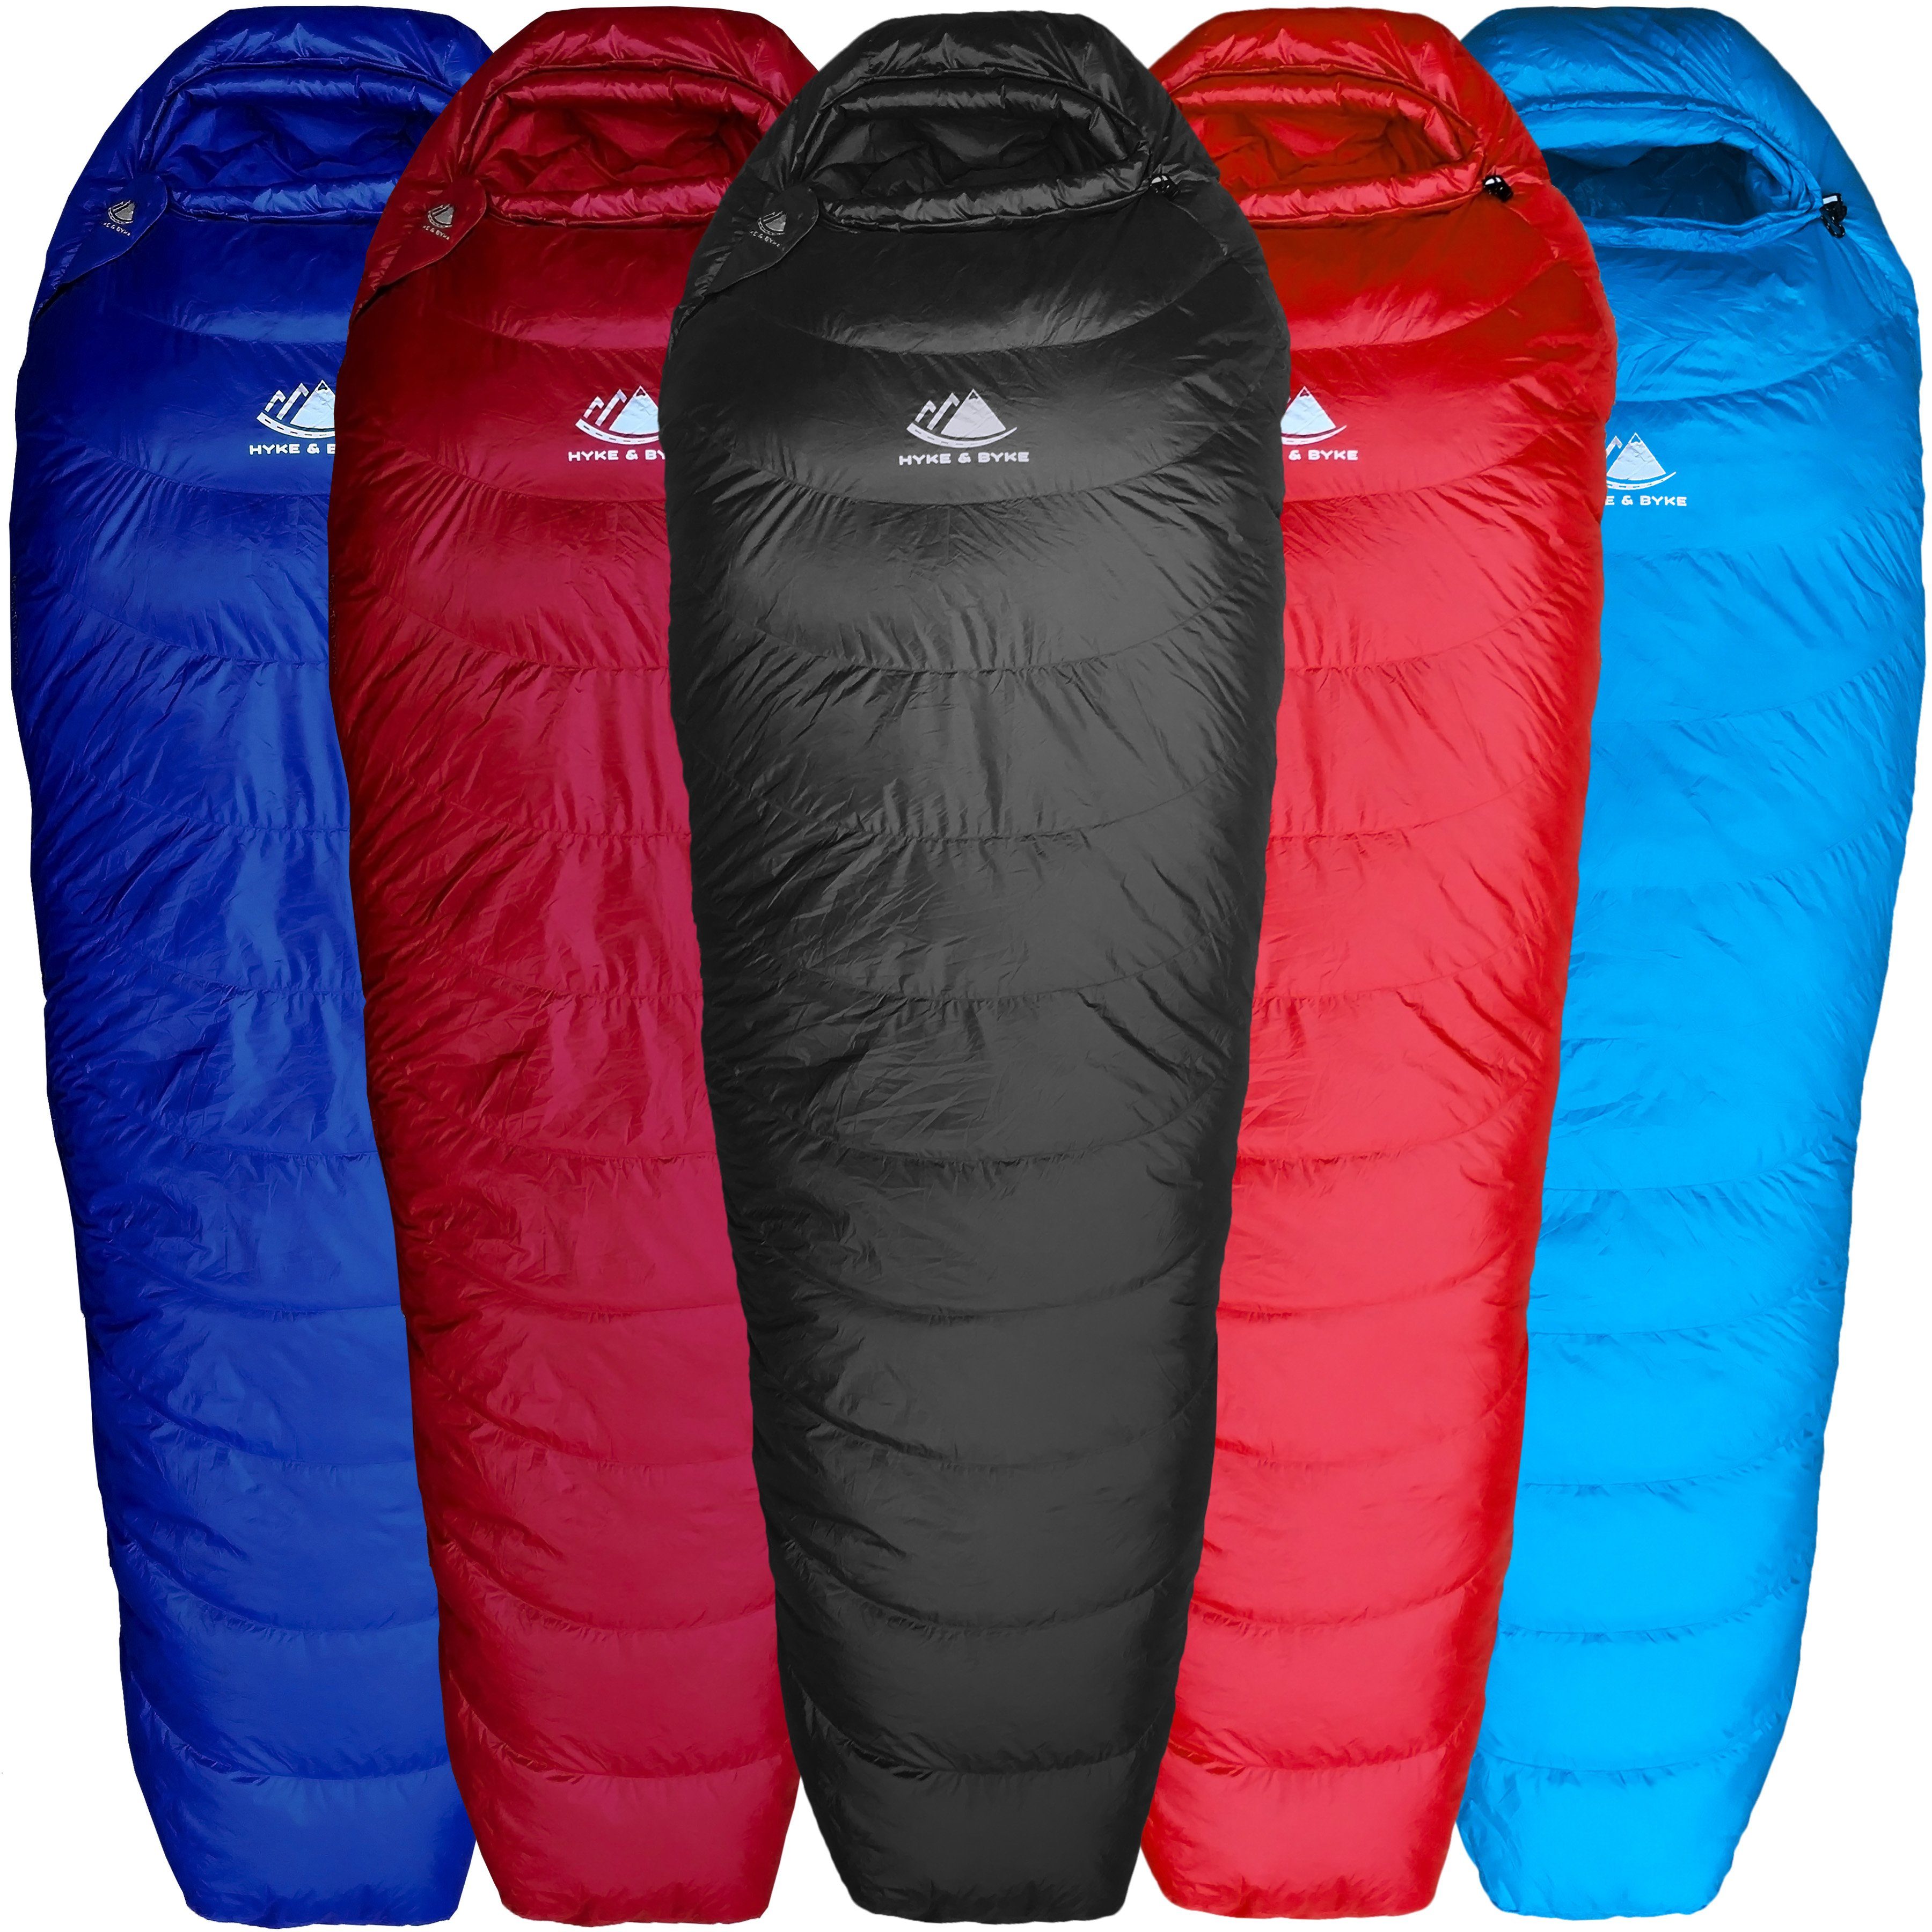 Sleeping Bags In A Compression Bags And Unpacked Stock Photo